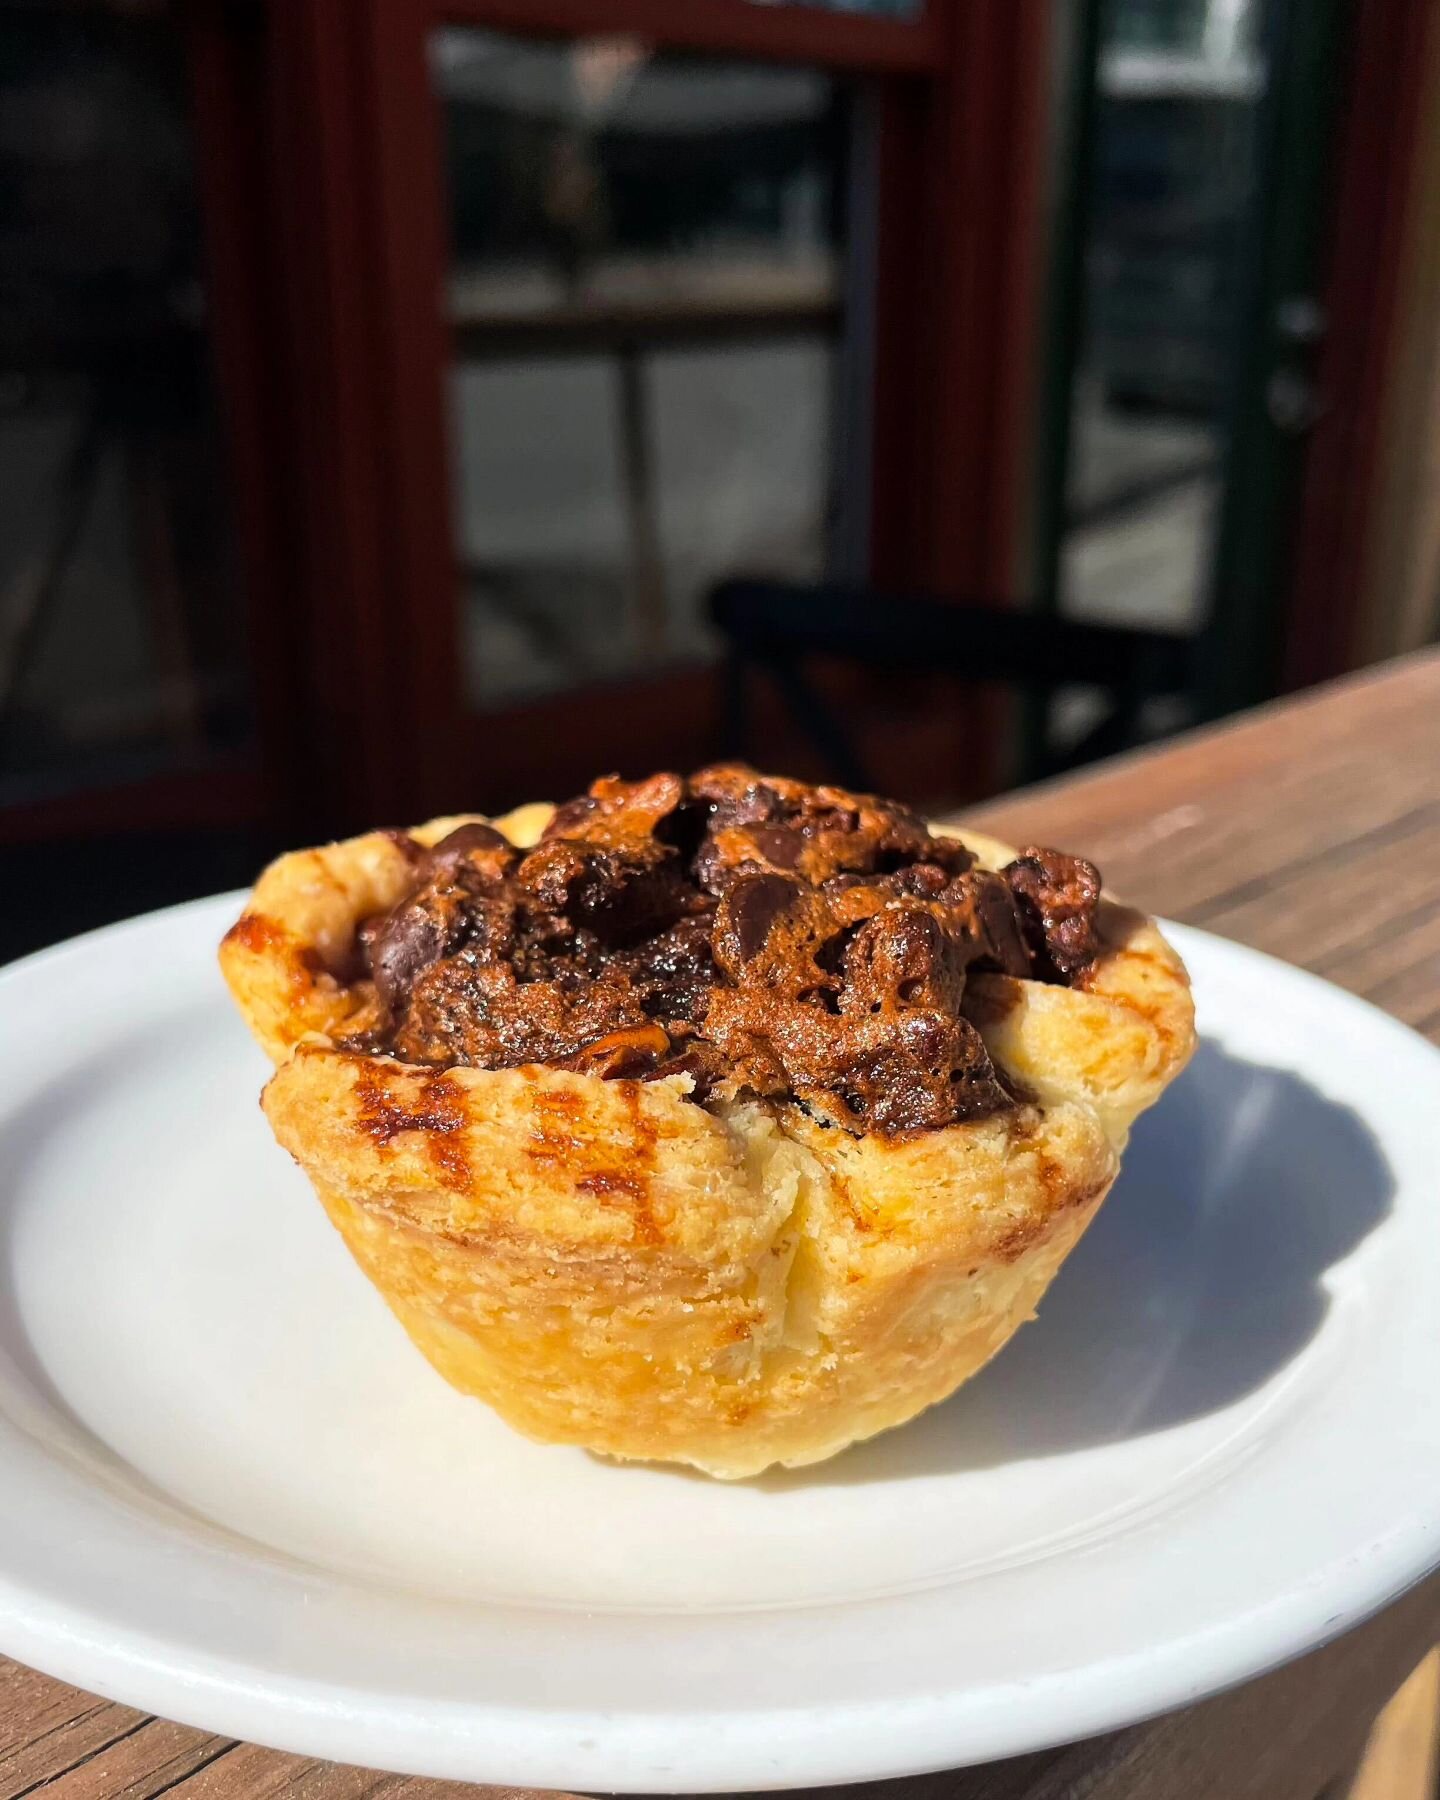 Let's keep the good times rolling this weekend! We have housemade chocolate bourbon pecan tarts on deck for tomorrow&mdash;the perfect post-breakfast treat to enjoy with a coffee. See you in the morning!